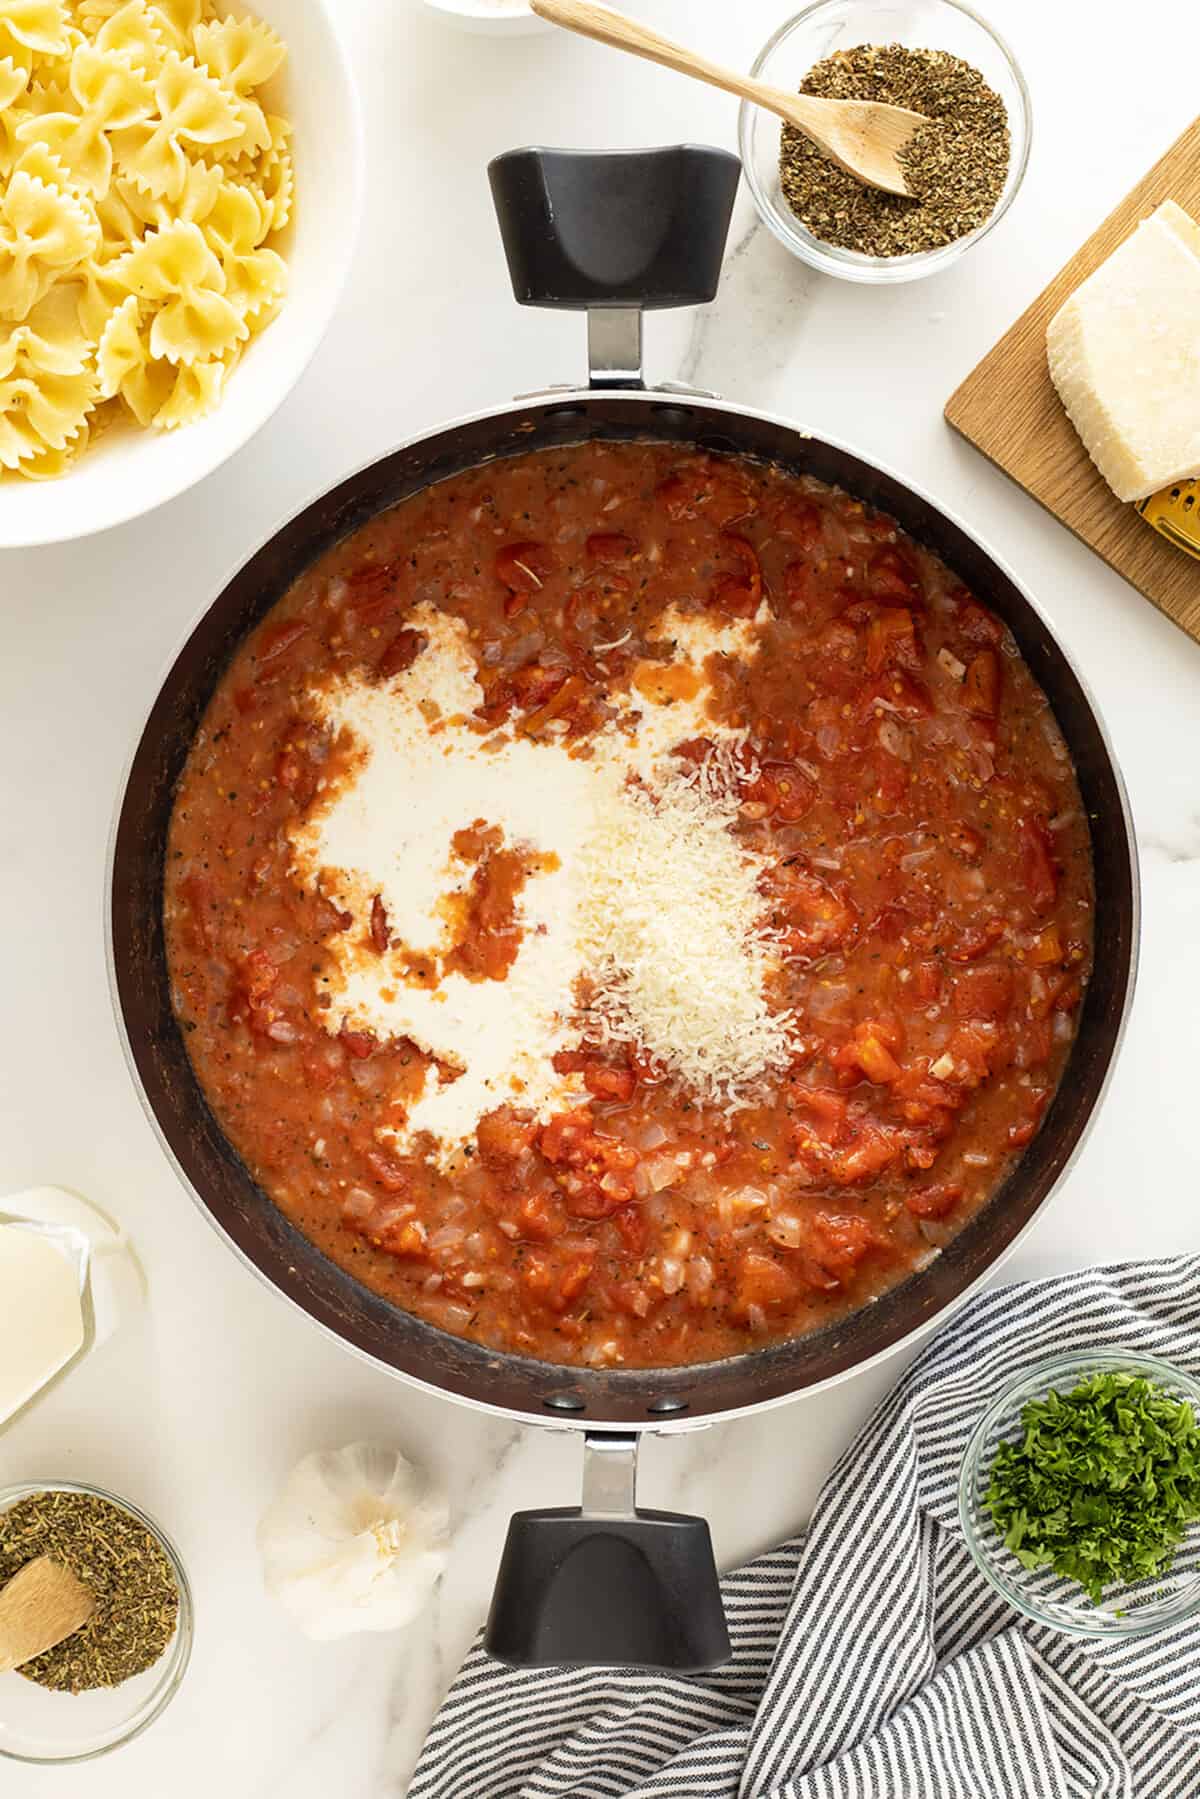 Tomato cream sauce in a pot with cream added in the center